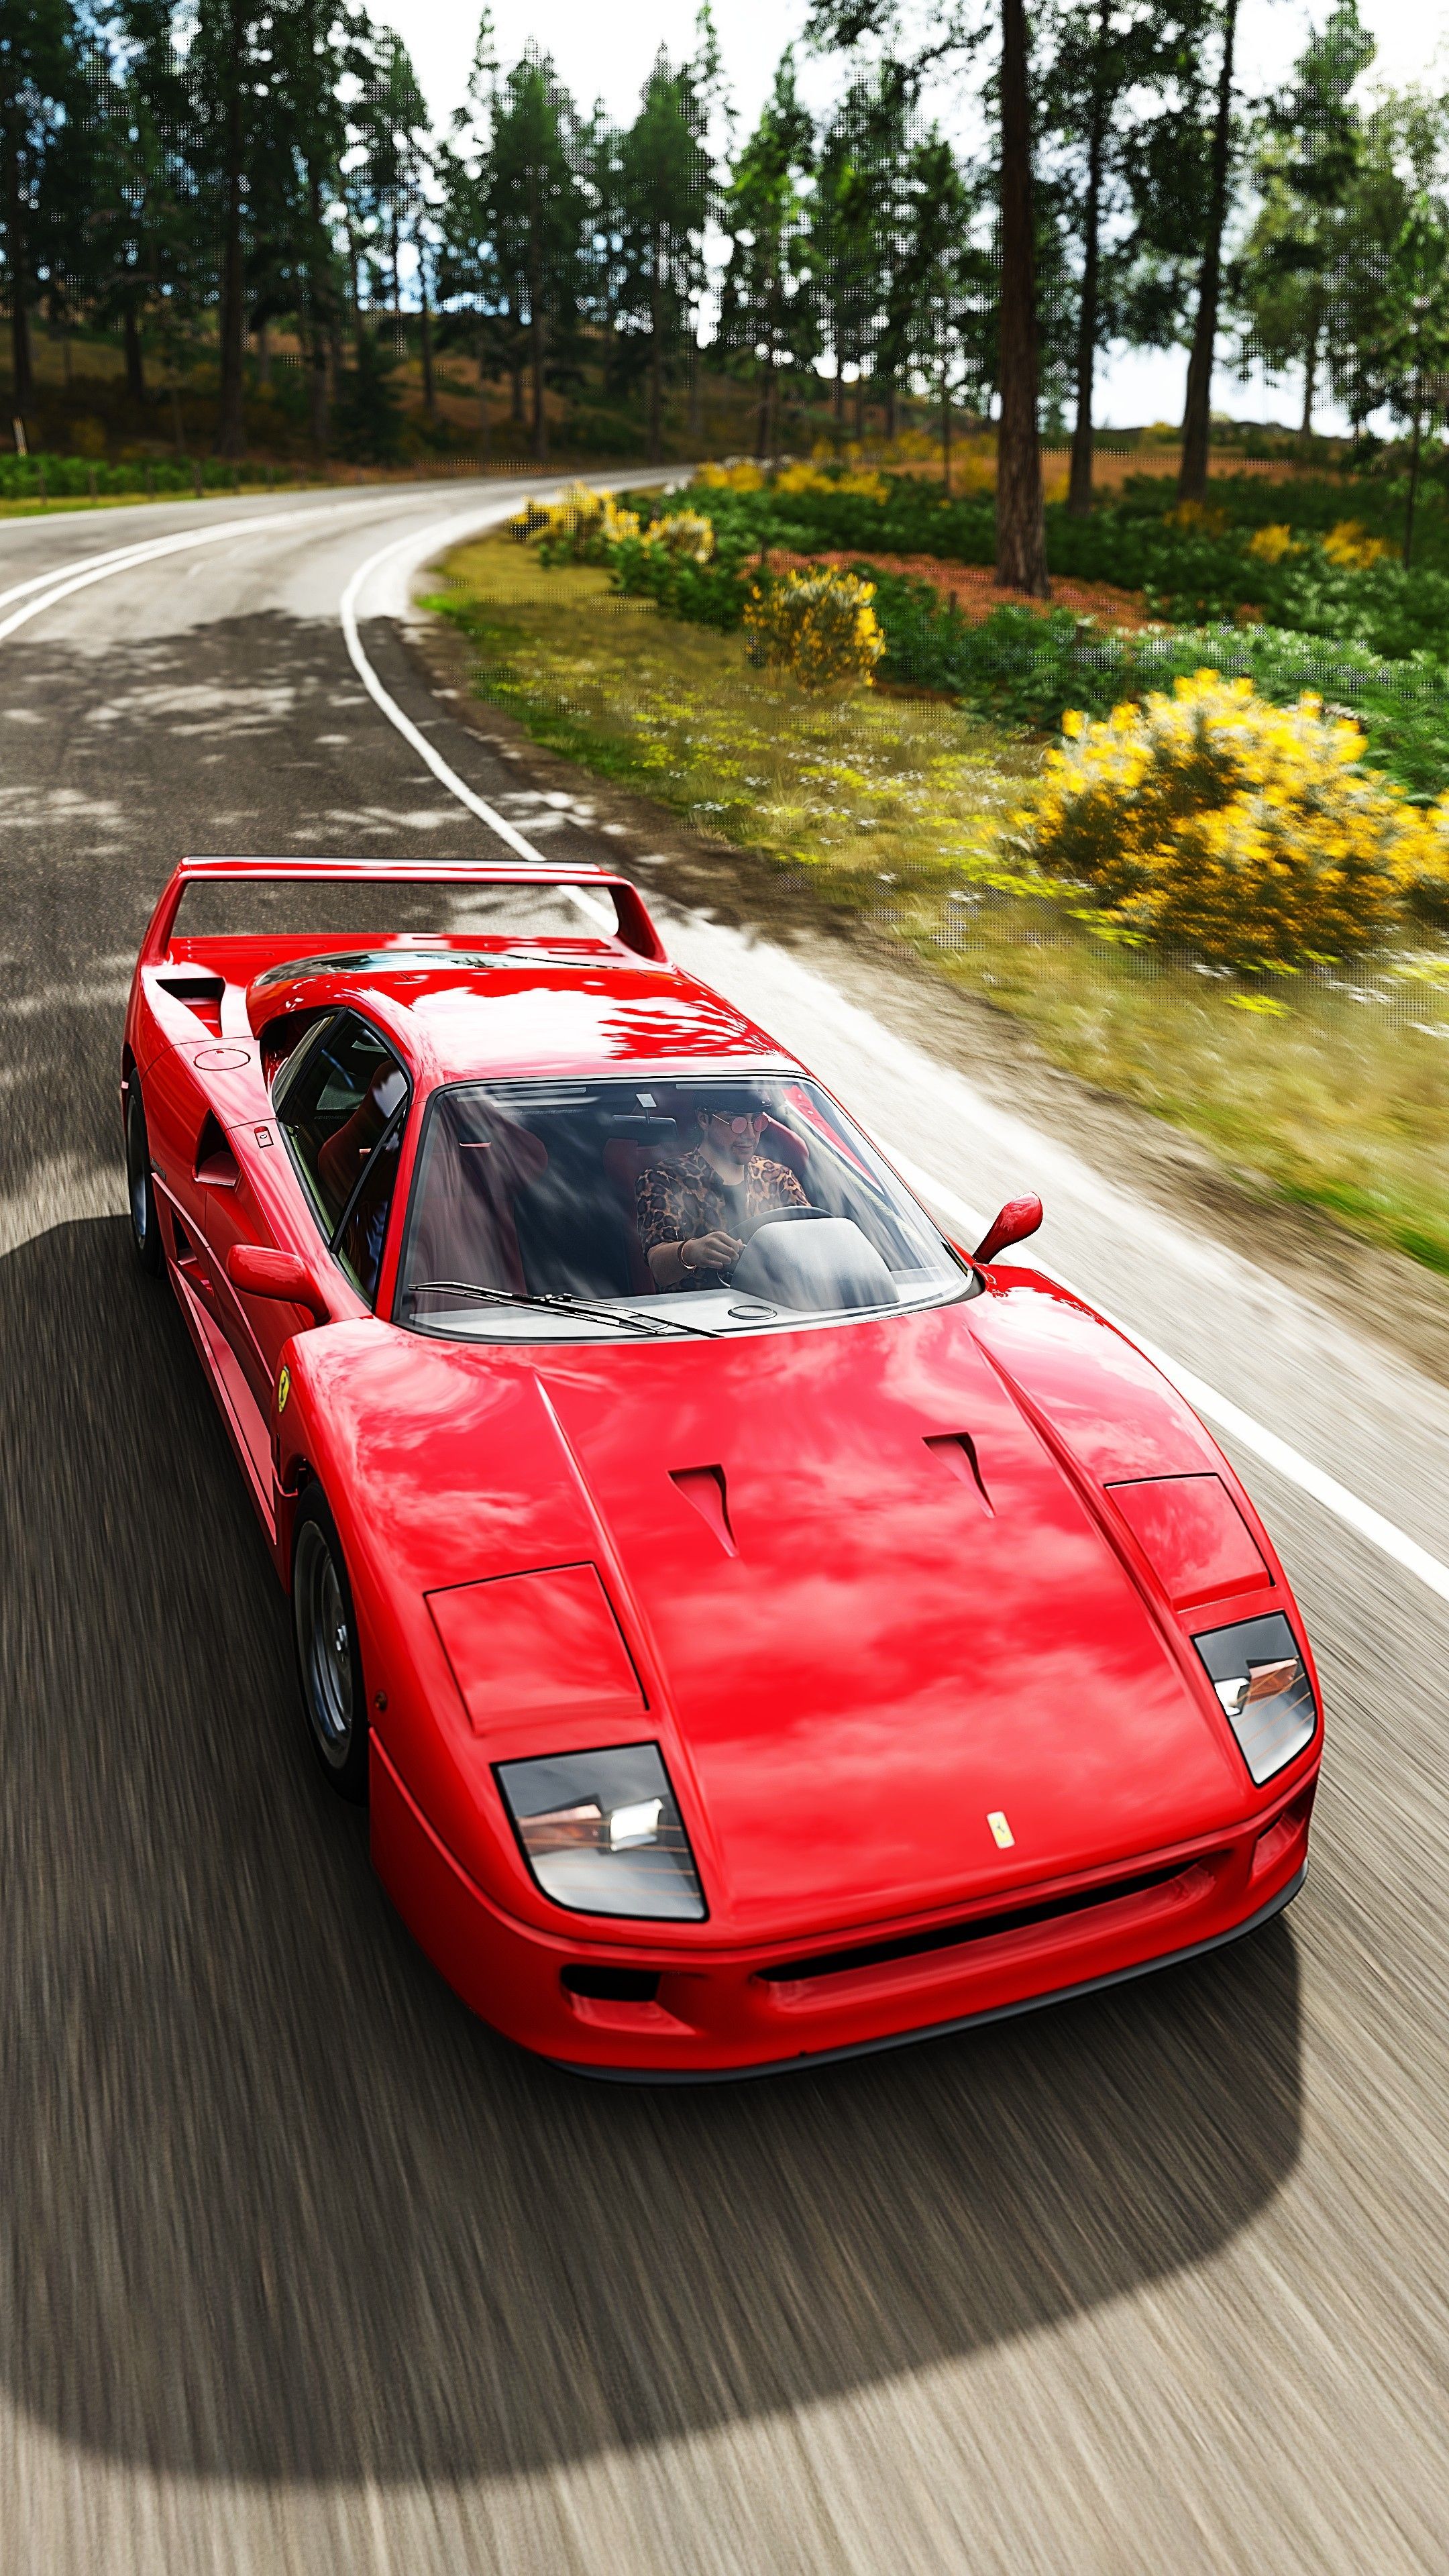 Download These Ferrari iPhone Wallpaper from Forza Now and Thank Us Later